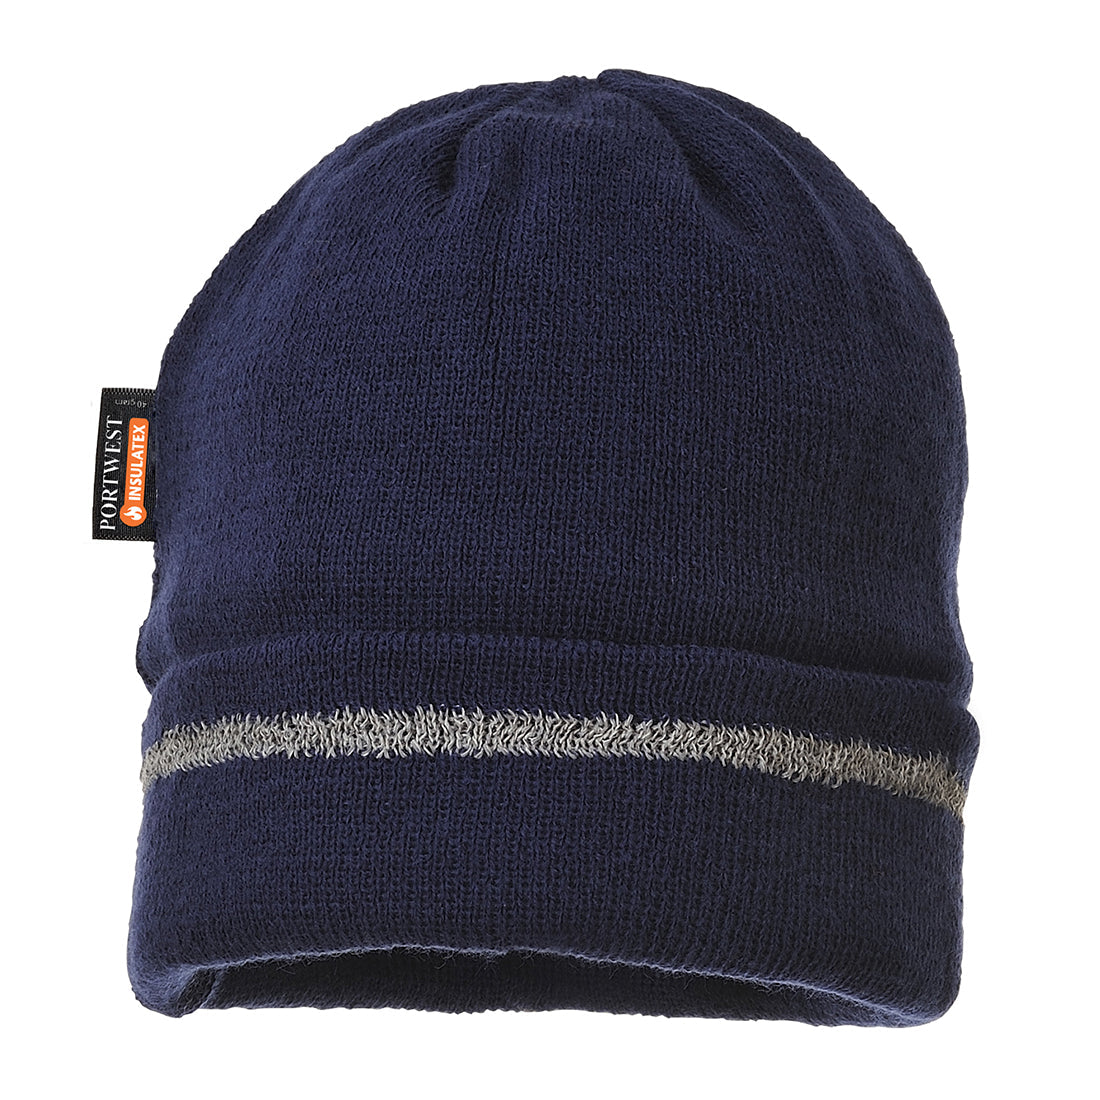 Portwest B023 Reflective Trim Knit Hat Insulatex Lined 1#colour_navy